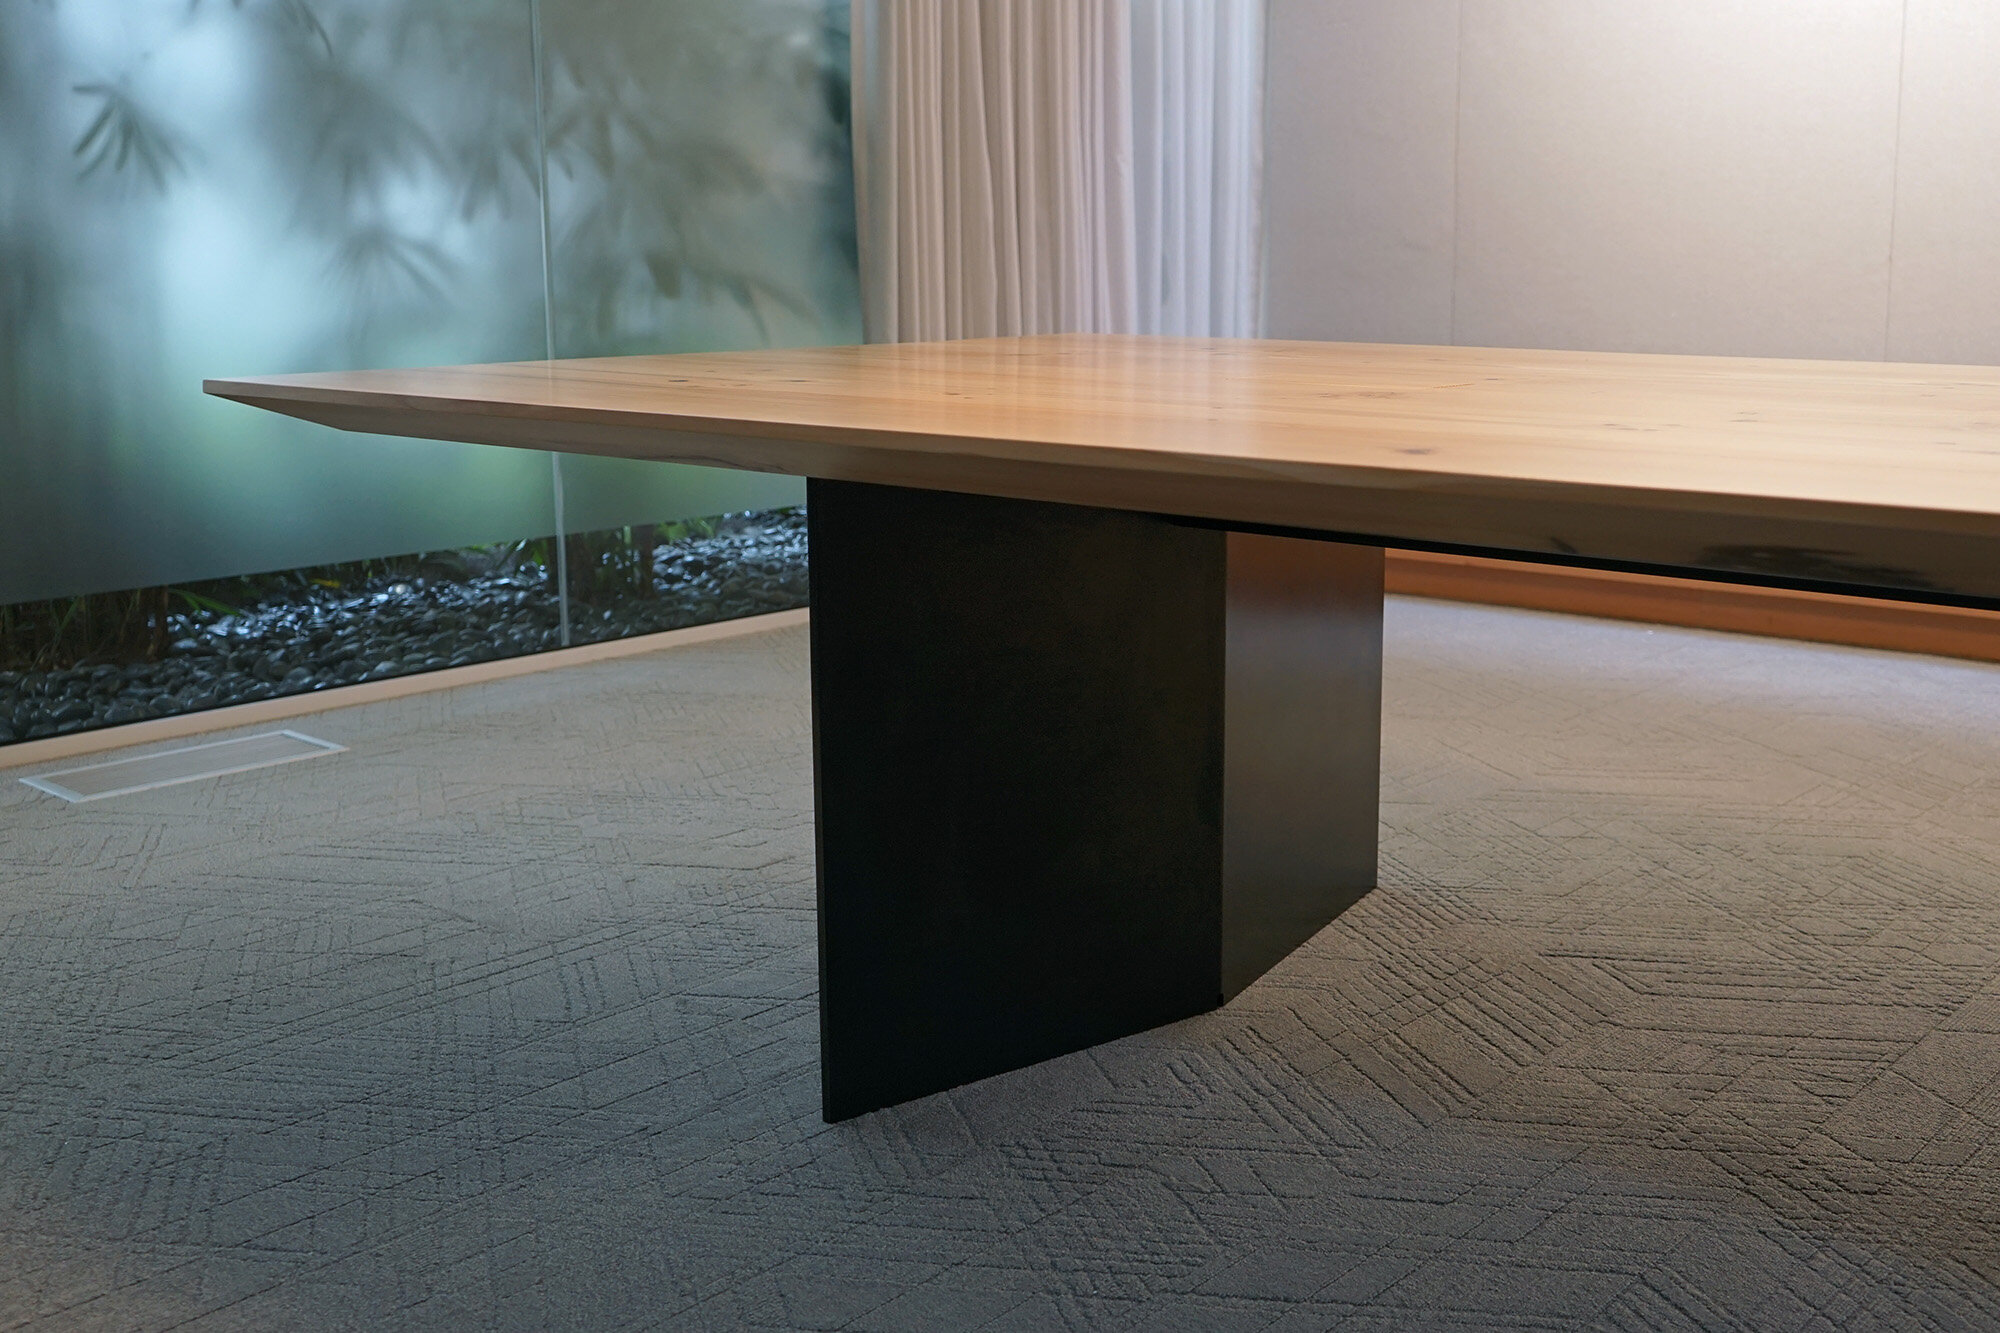 03 Fritz Conference Table Base Detail.jpg